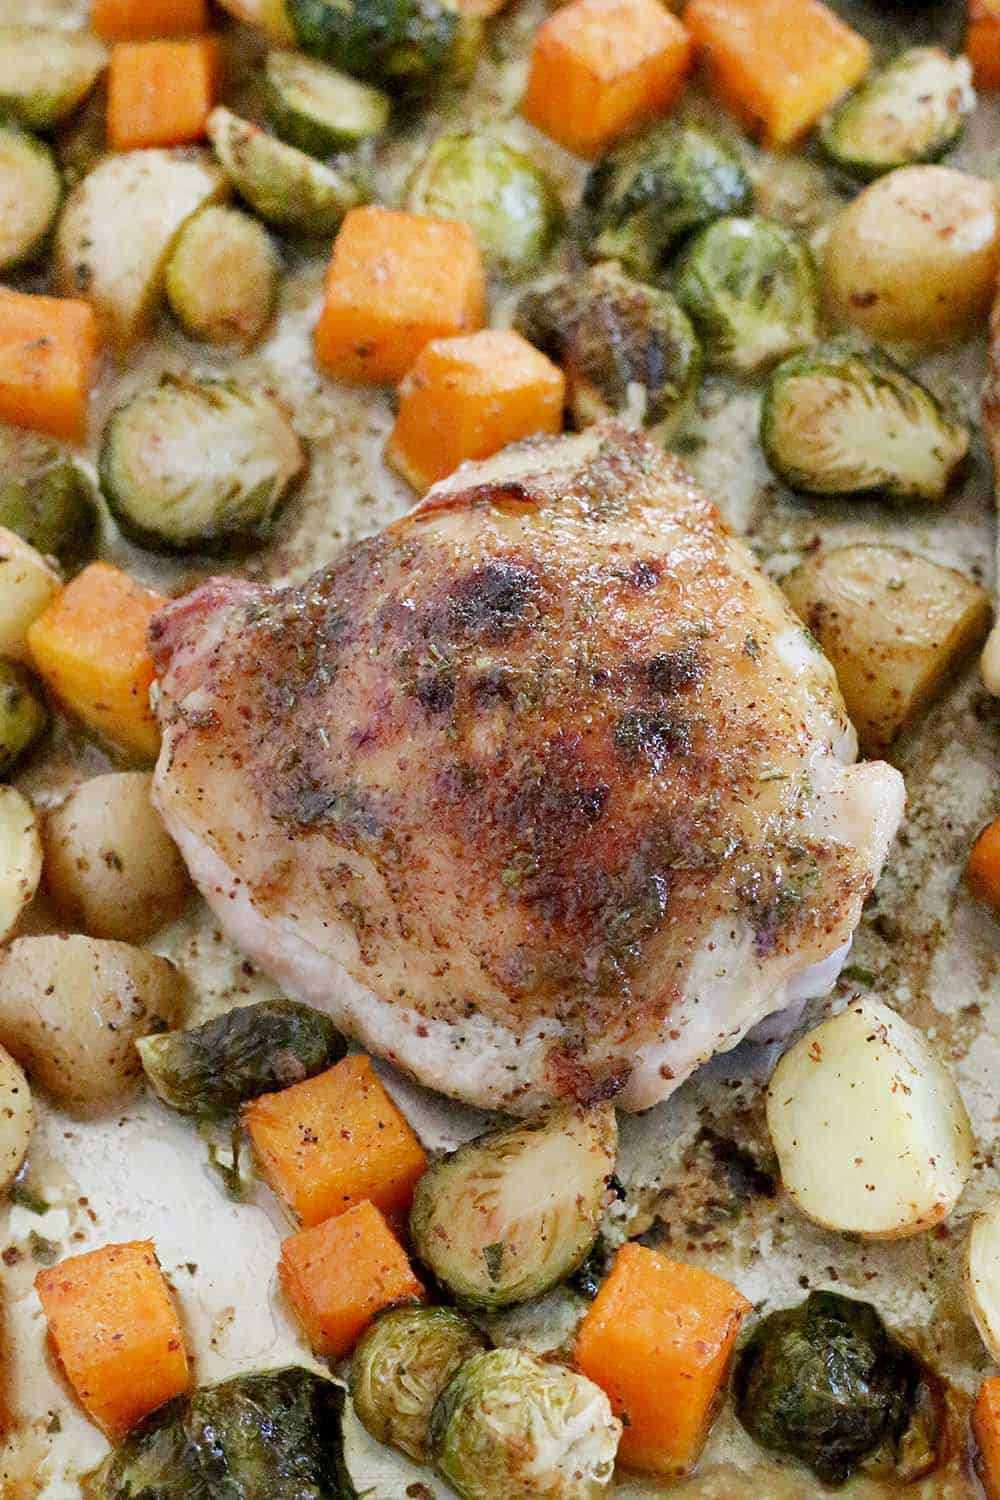 This Maple and Rosemary Glazed Chicken and Fall Veggies Sheet Pan Dinner is an easy way to make a full meal in one pan! Slightly sweet and savory at once, the flavor of the glaze is amazing and coats every single bite. The whole family will love this. #sheetpandinner #paleo #brusselssprouts